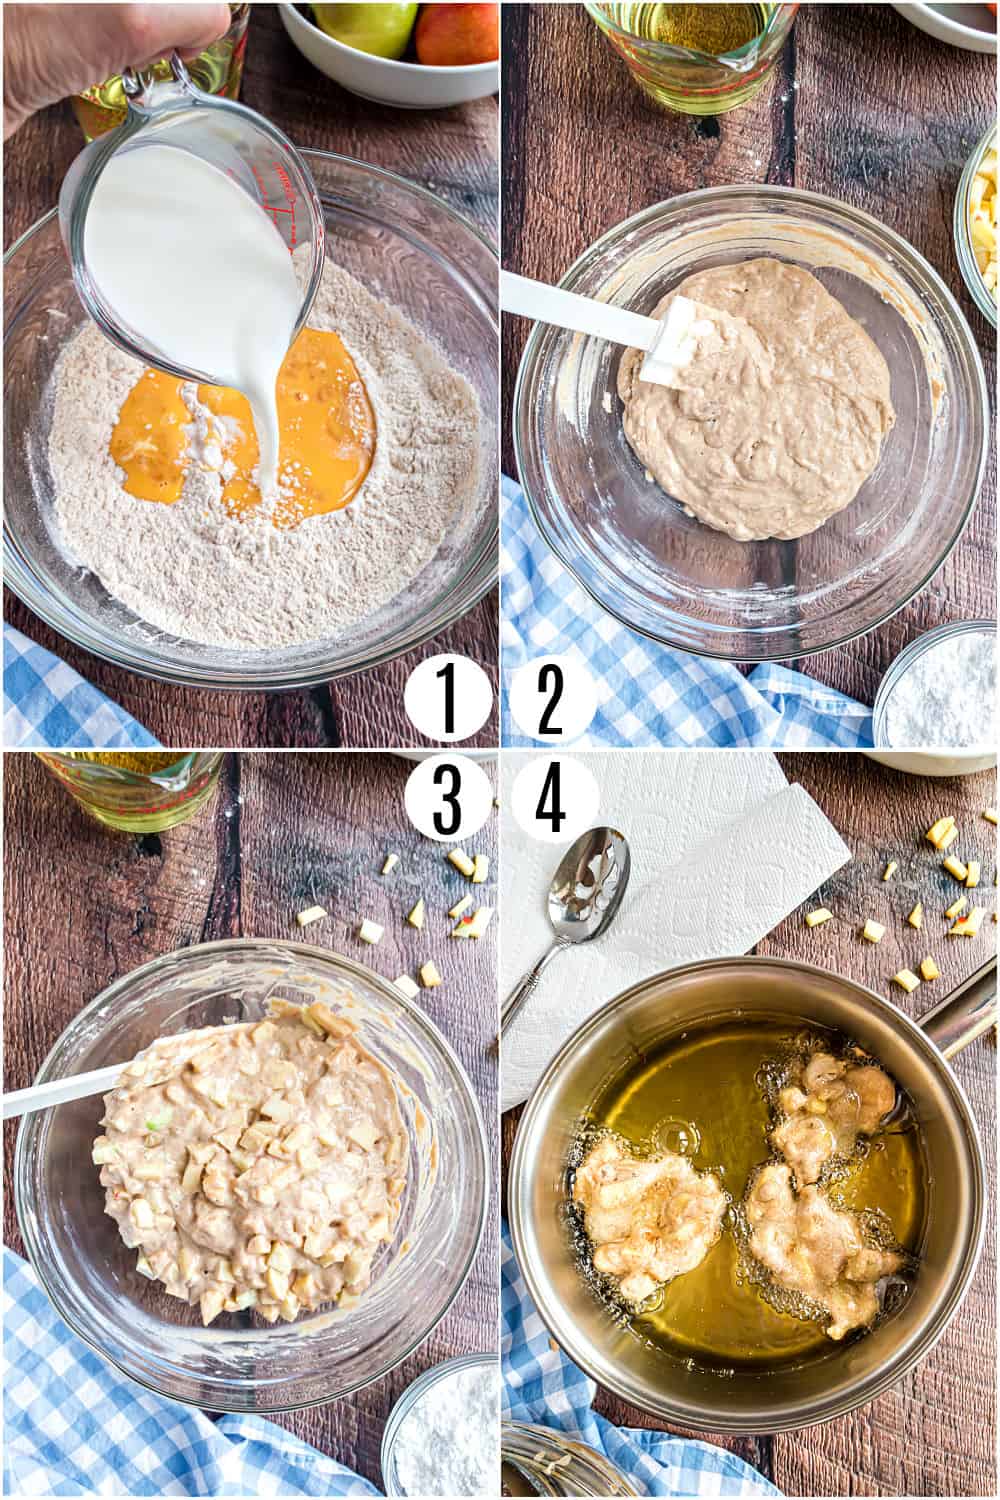 Step by step photos showing how to make apple fritter batter.